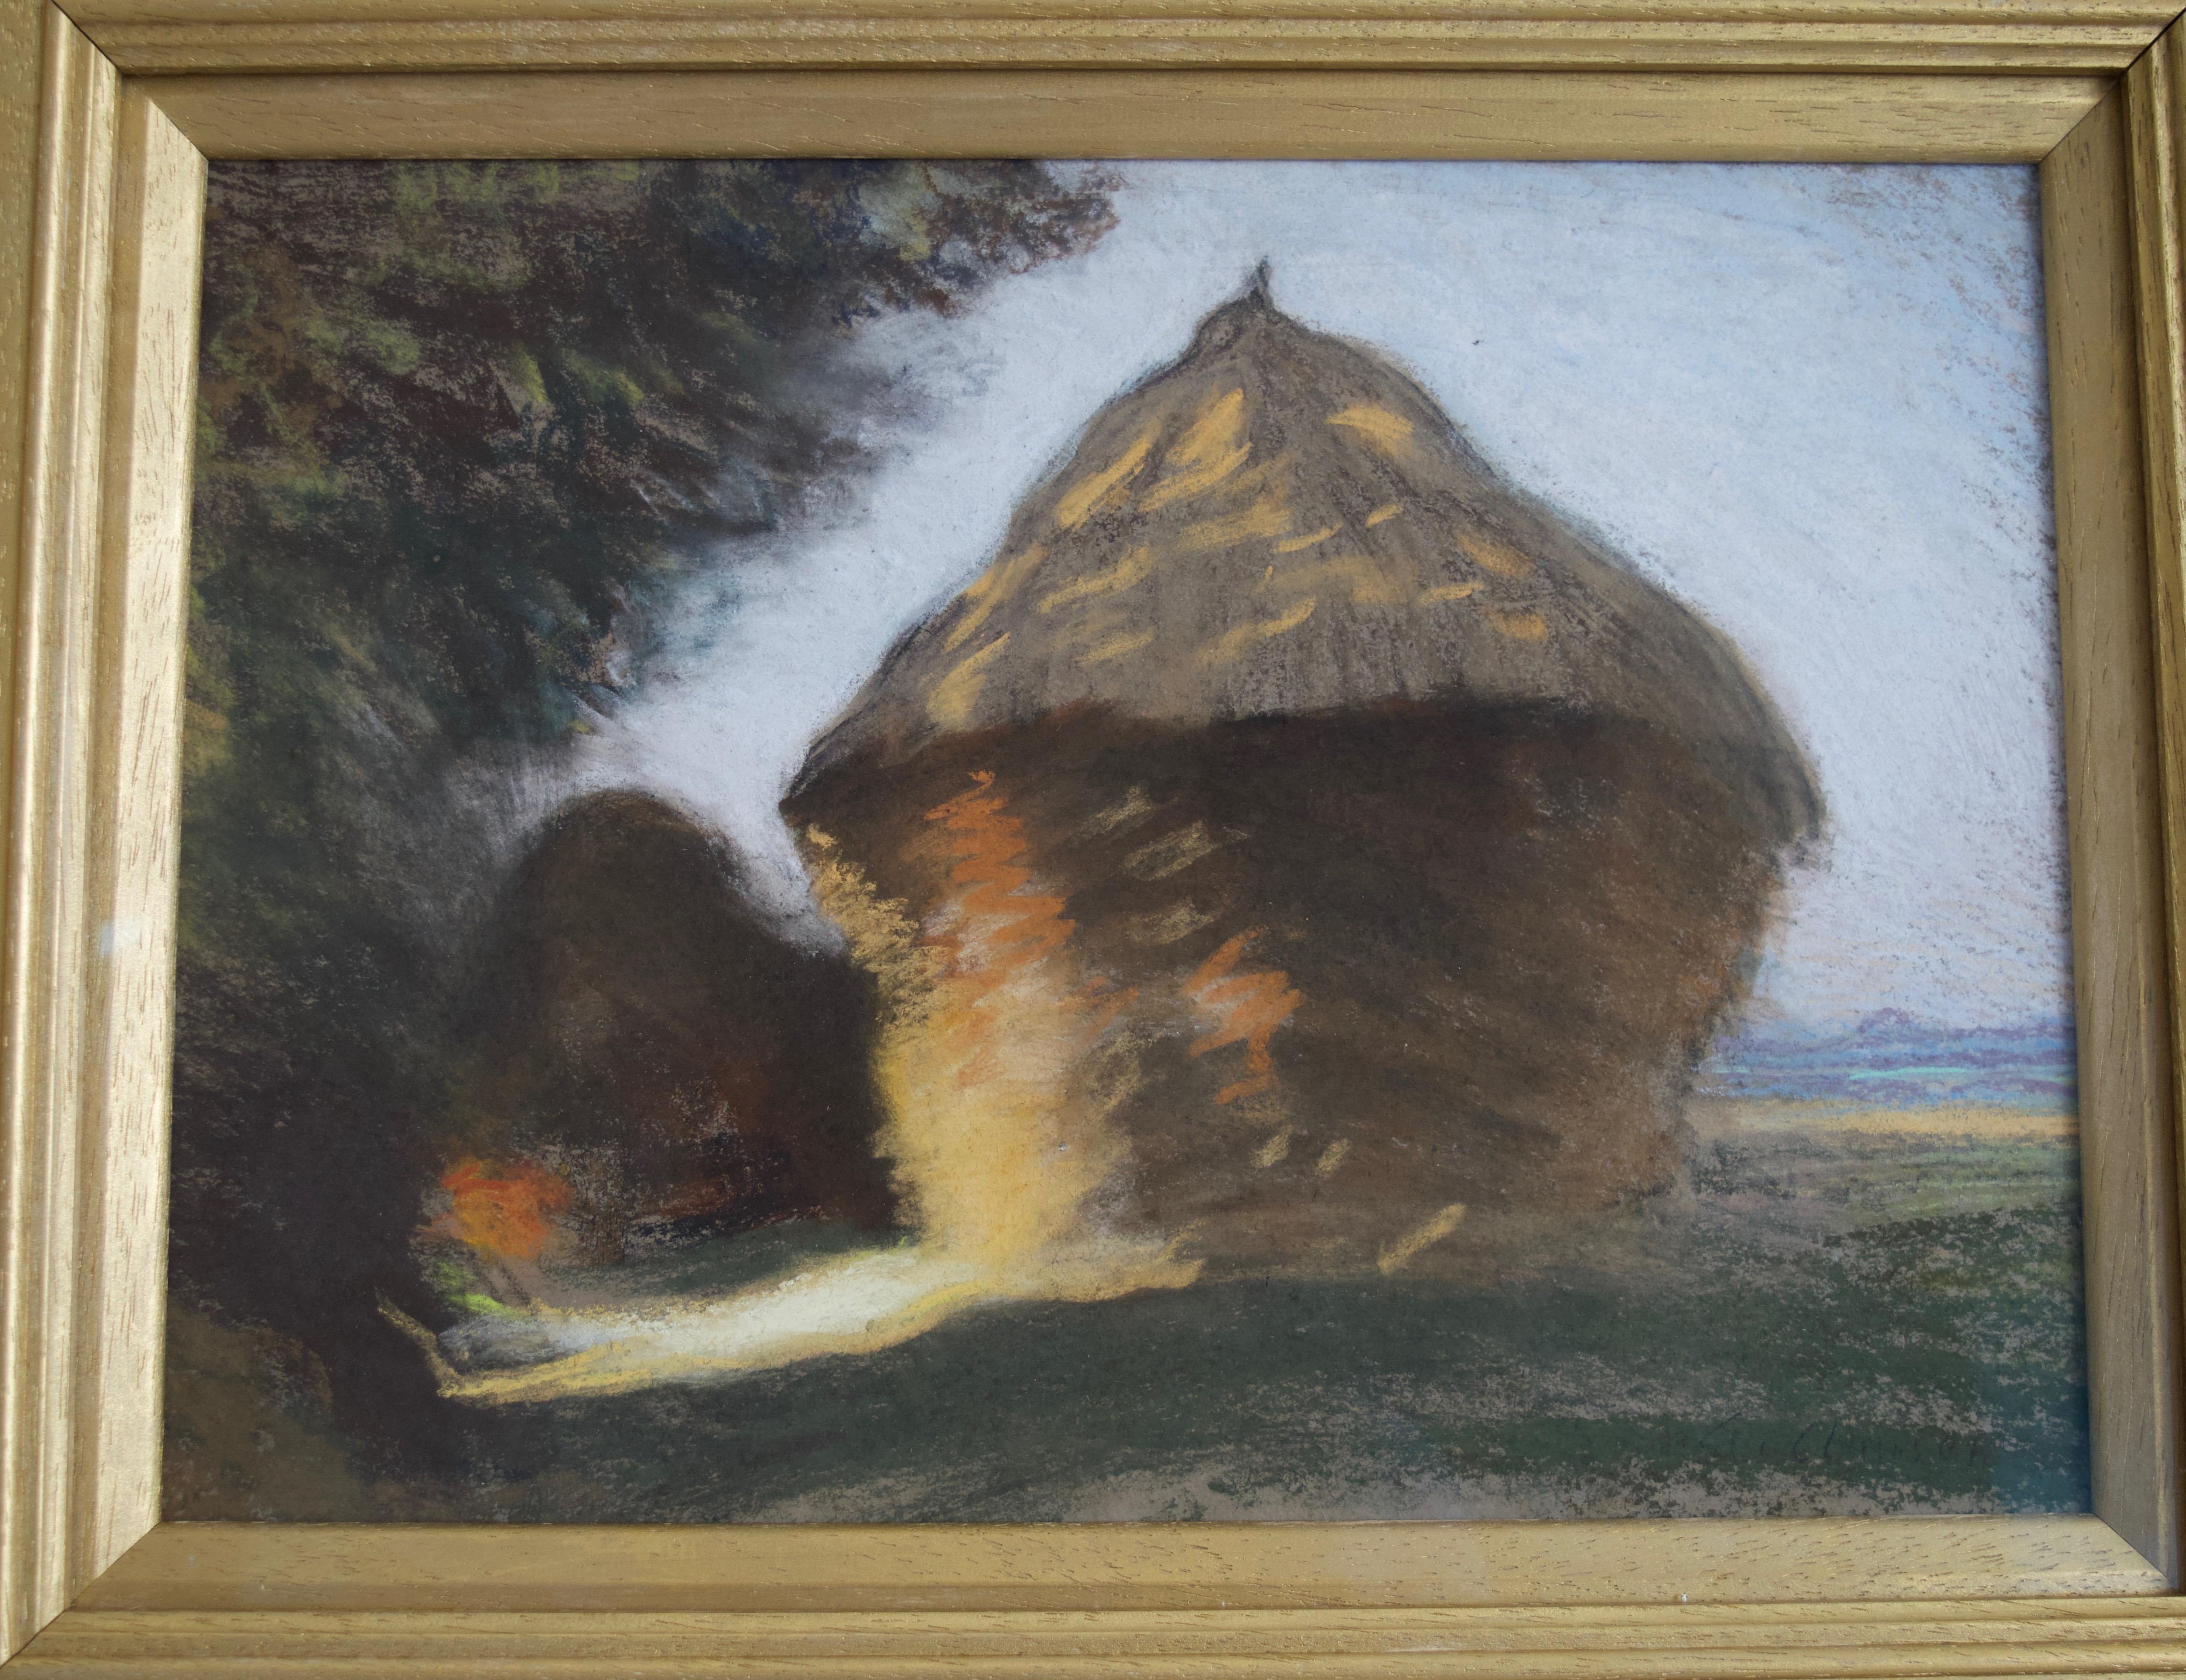 An instantly captivating image by one of the great masters of British Impressionism. The hayrick or haystack is one of the foremost icons of 19th century plein air painting: a subject so beloved by Monet and the Impressionists.

Sir George Clausen